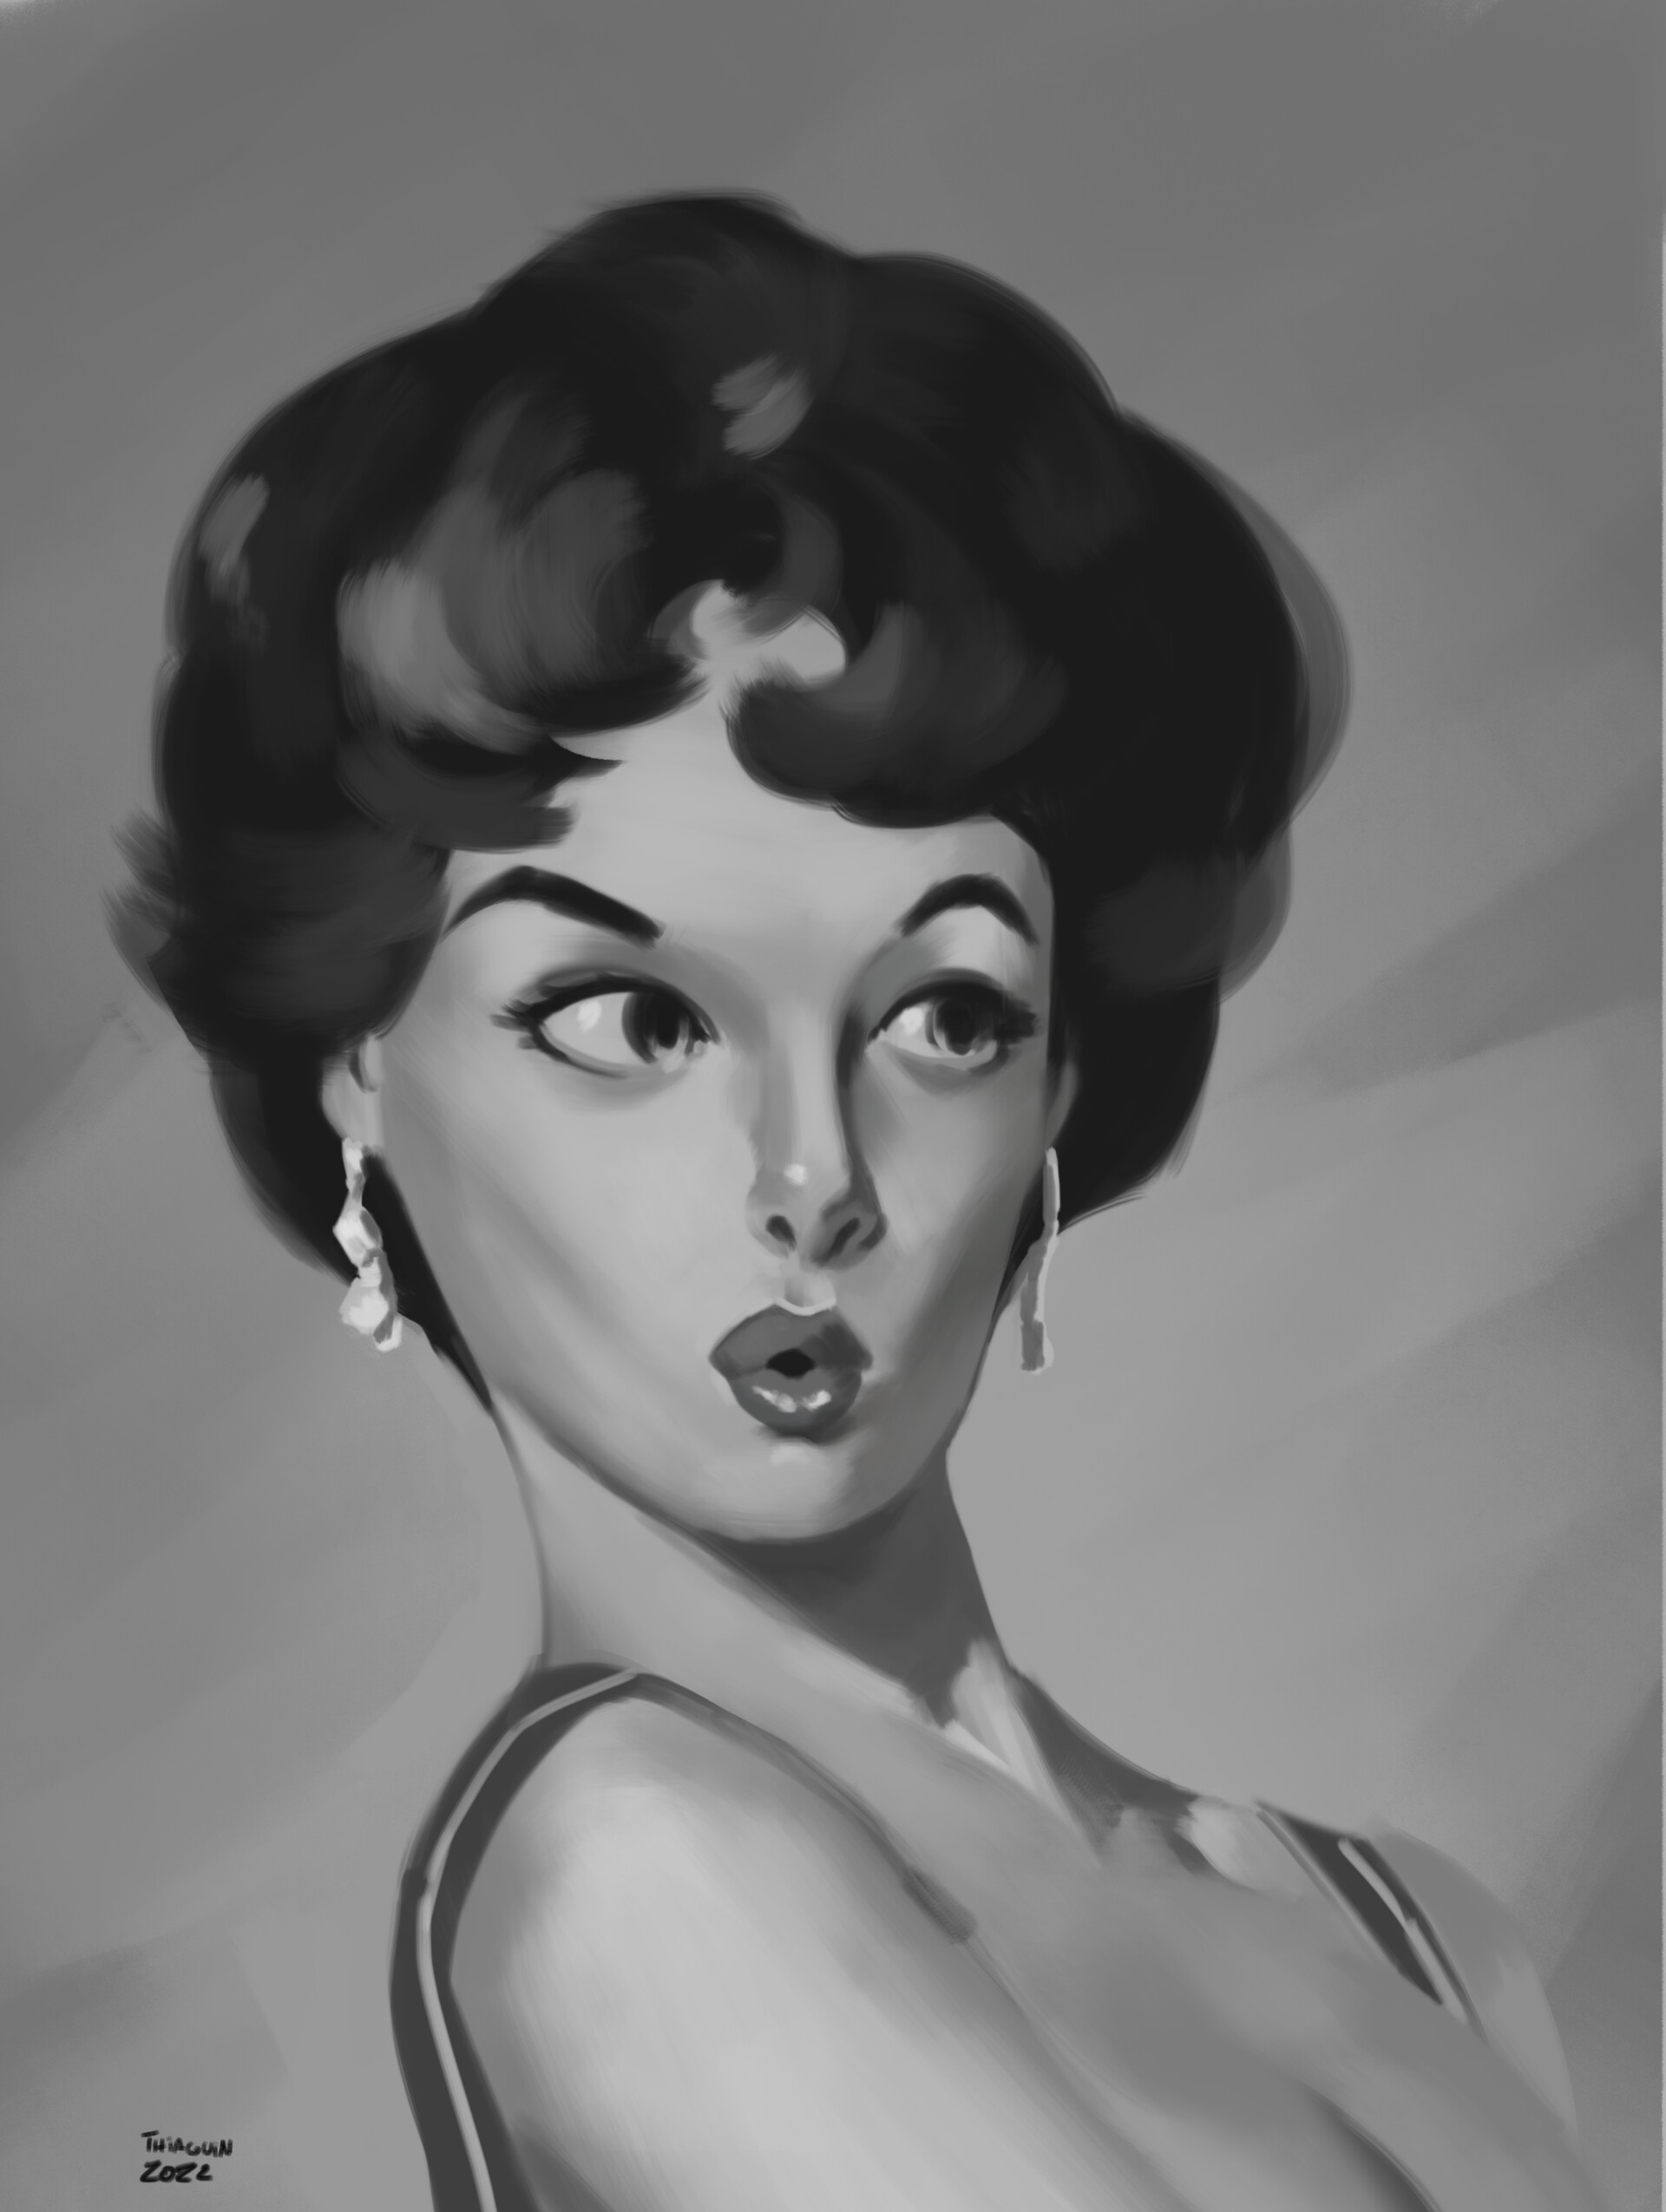 ArtStation - Pin up that i did based on a Gil Elvgren's piece